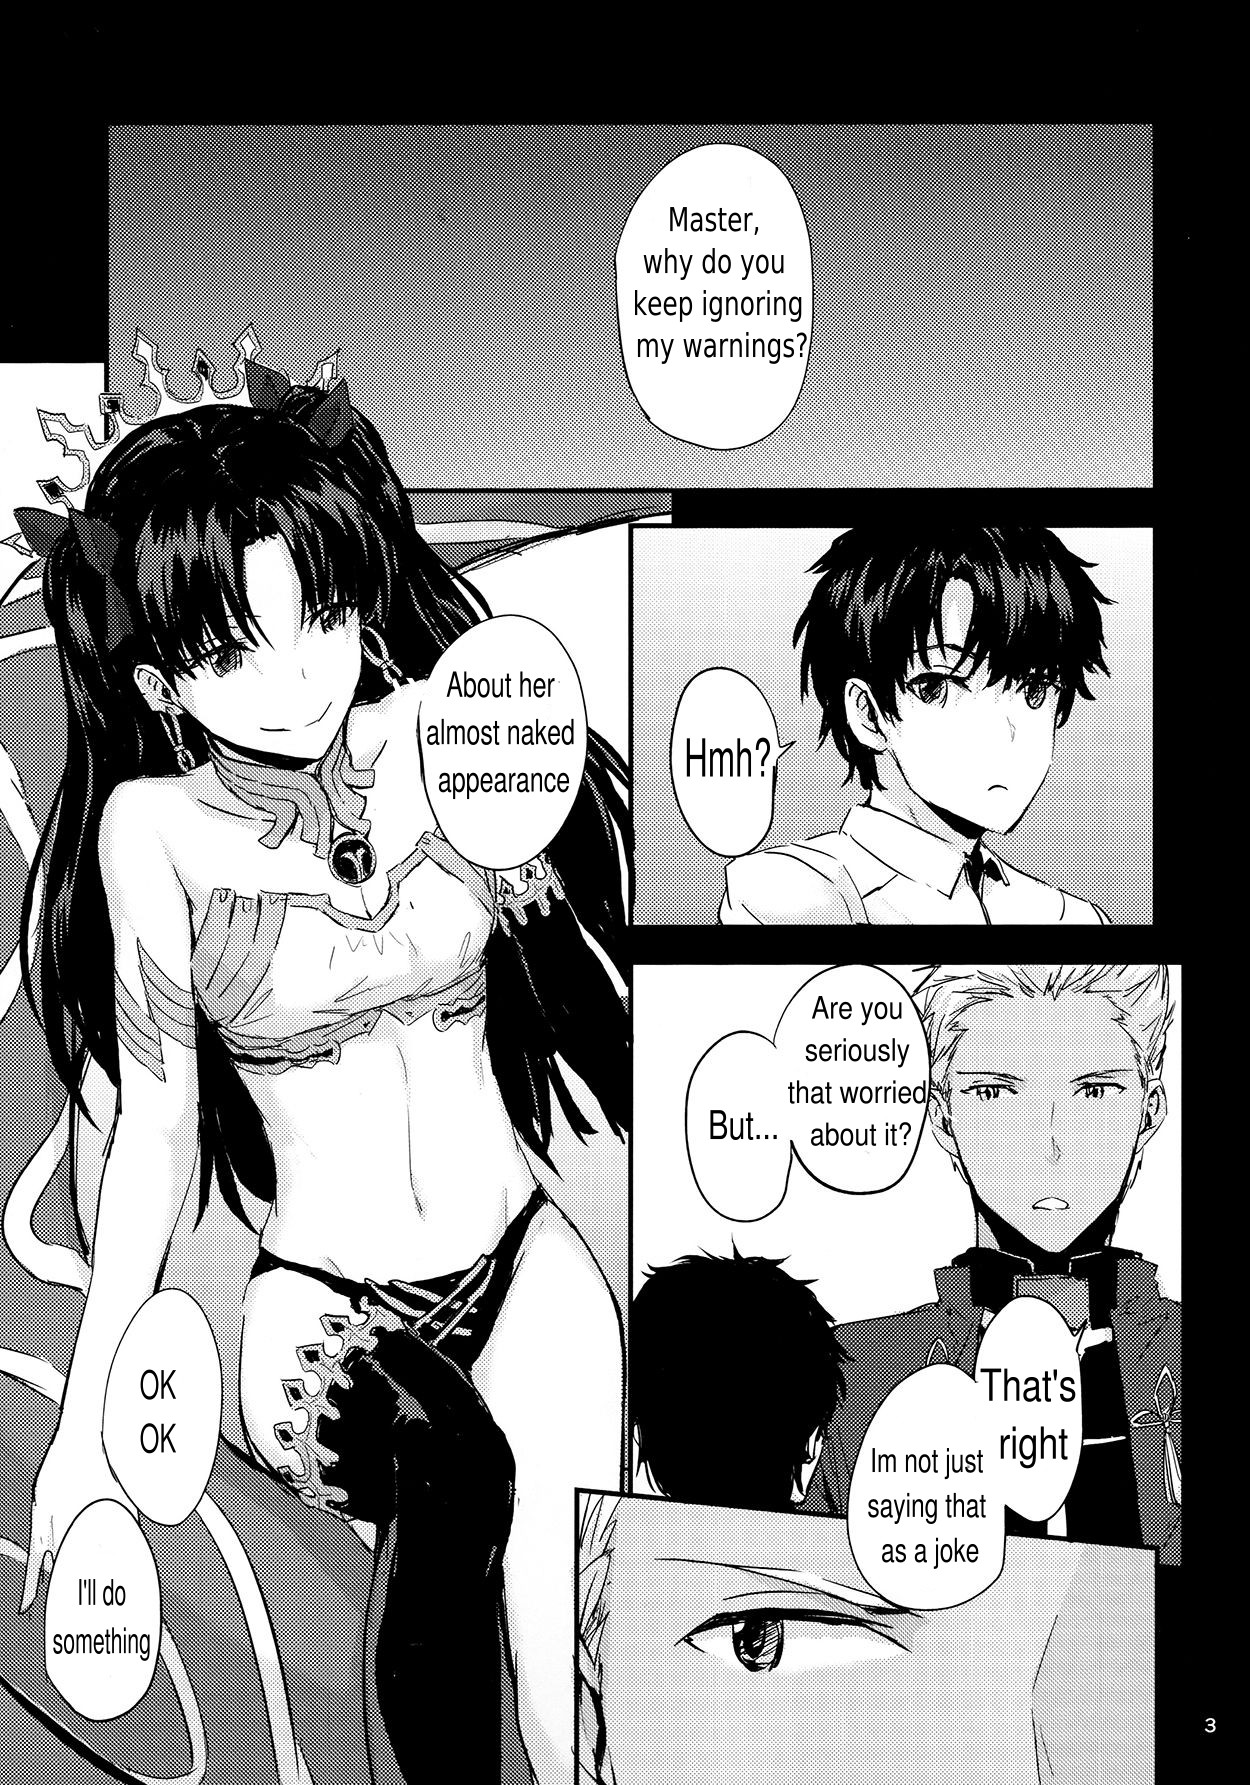 Hentai Manga Comic-The Mind Is Made of a Body 2-v22m-Read-2